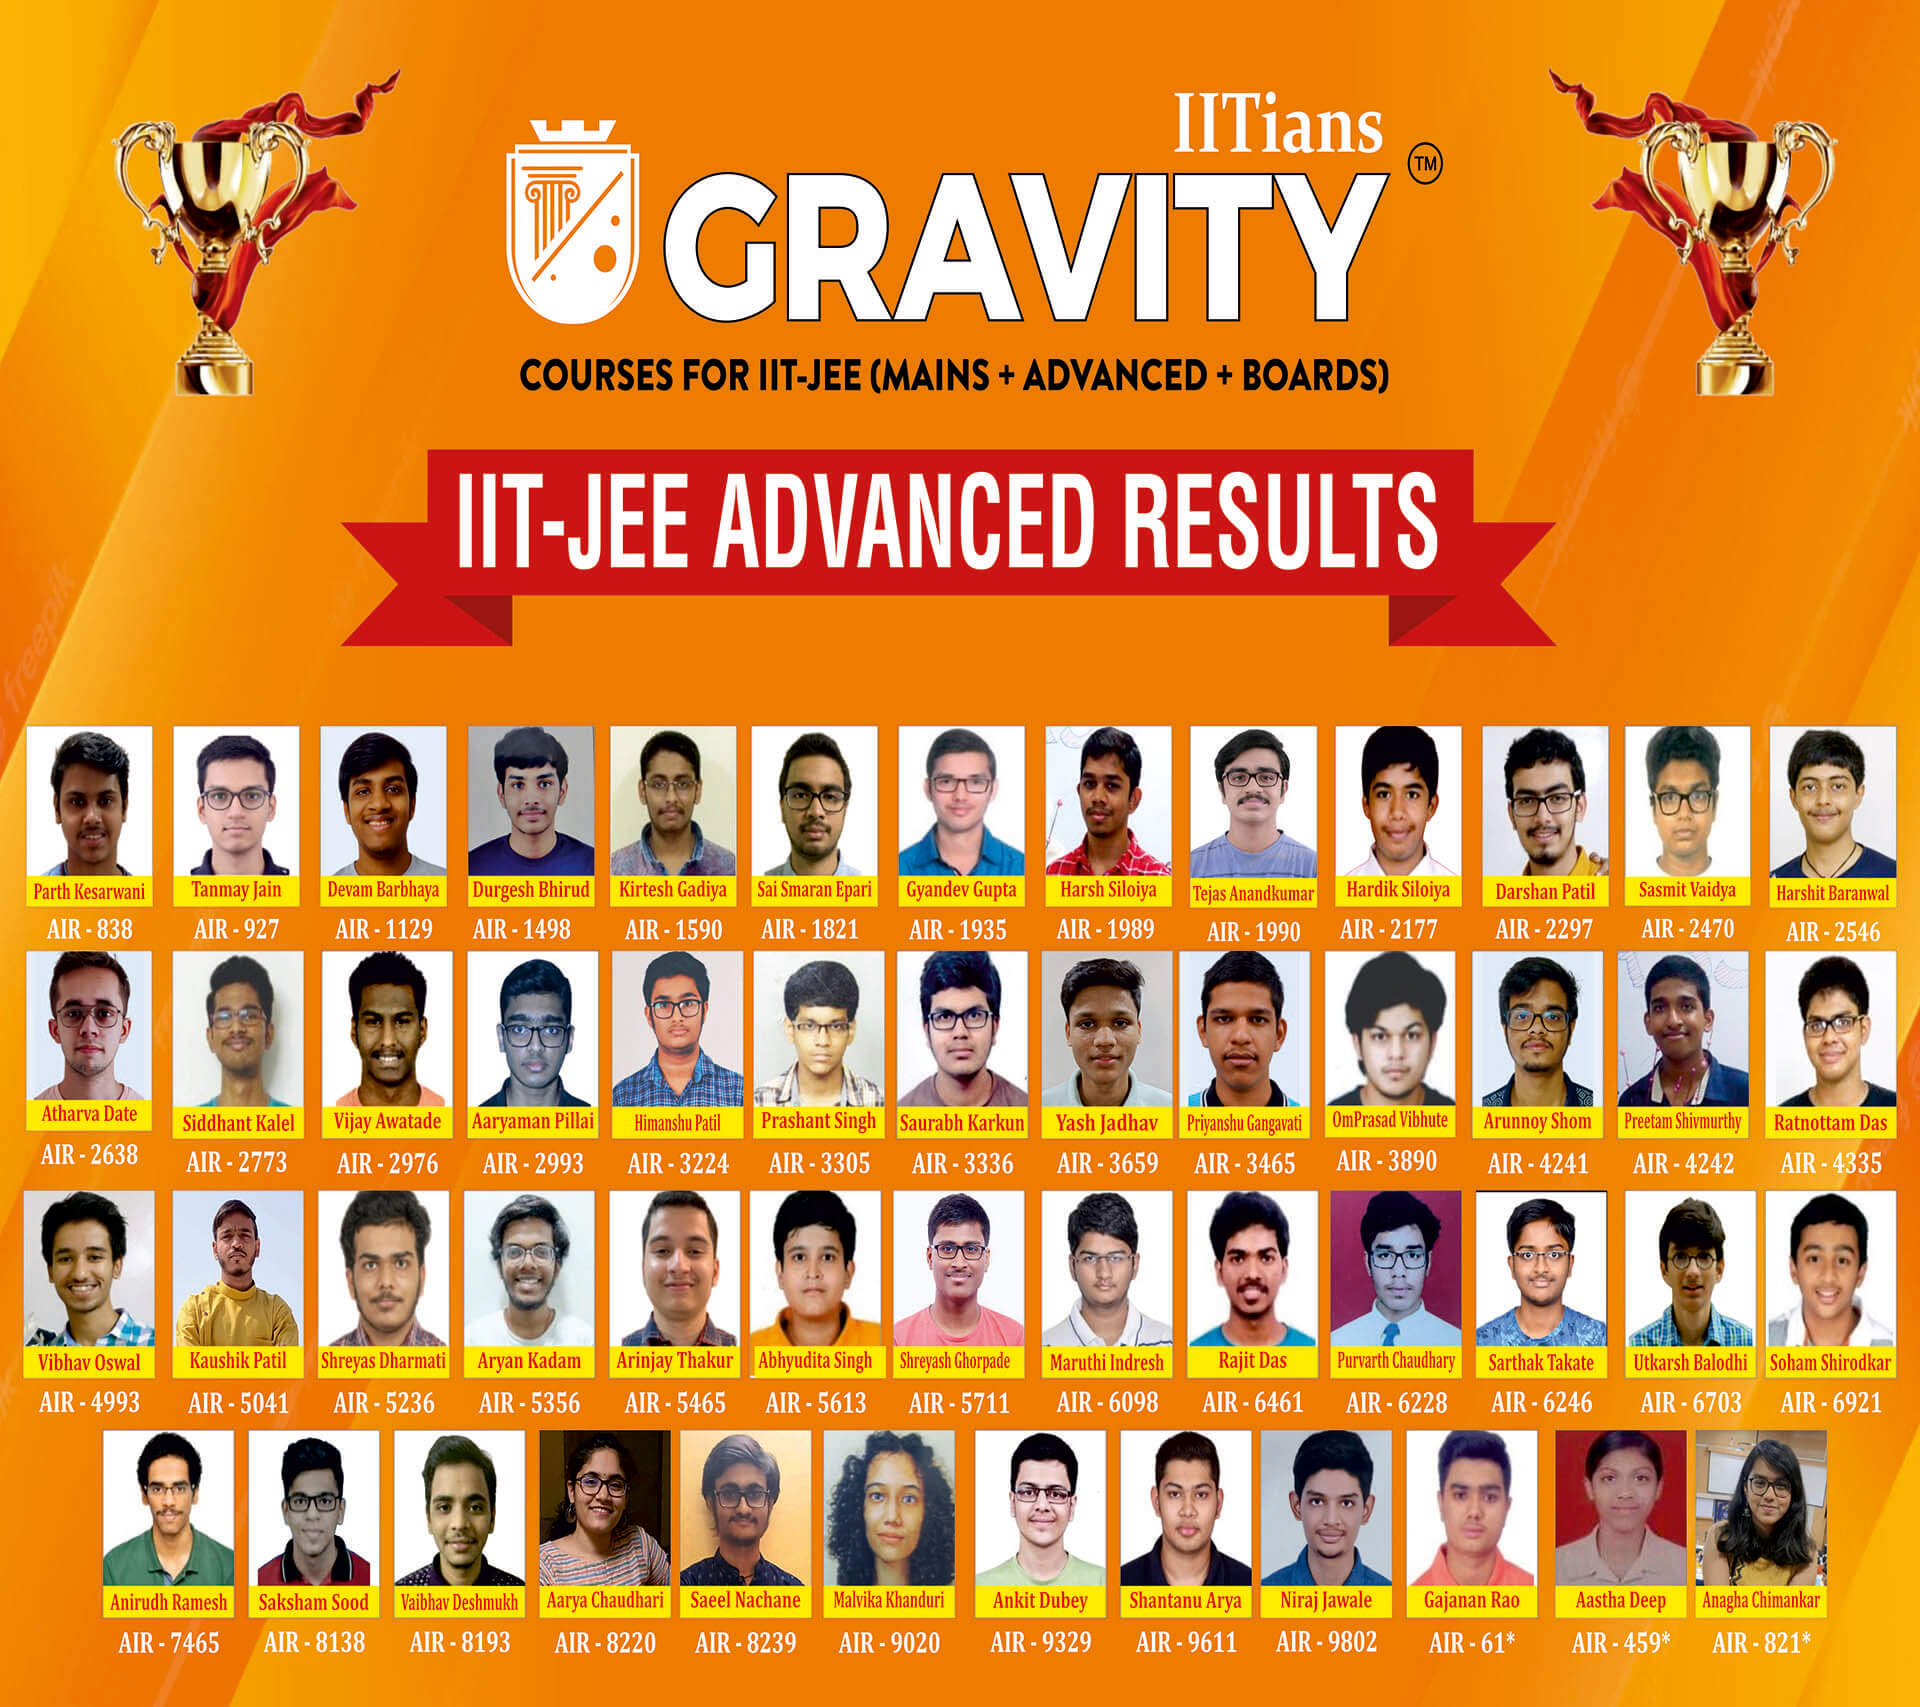 IIT-JEE Advanced Results